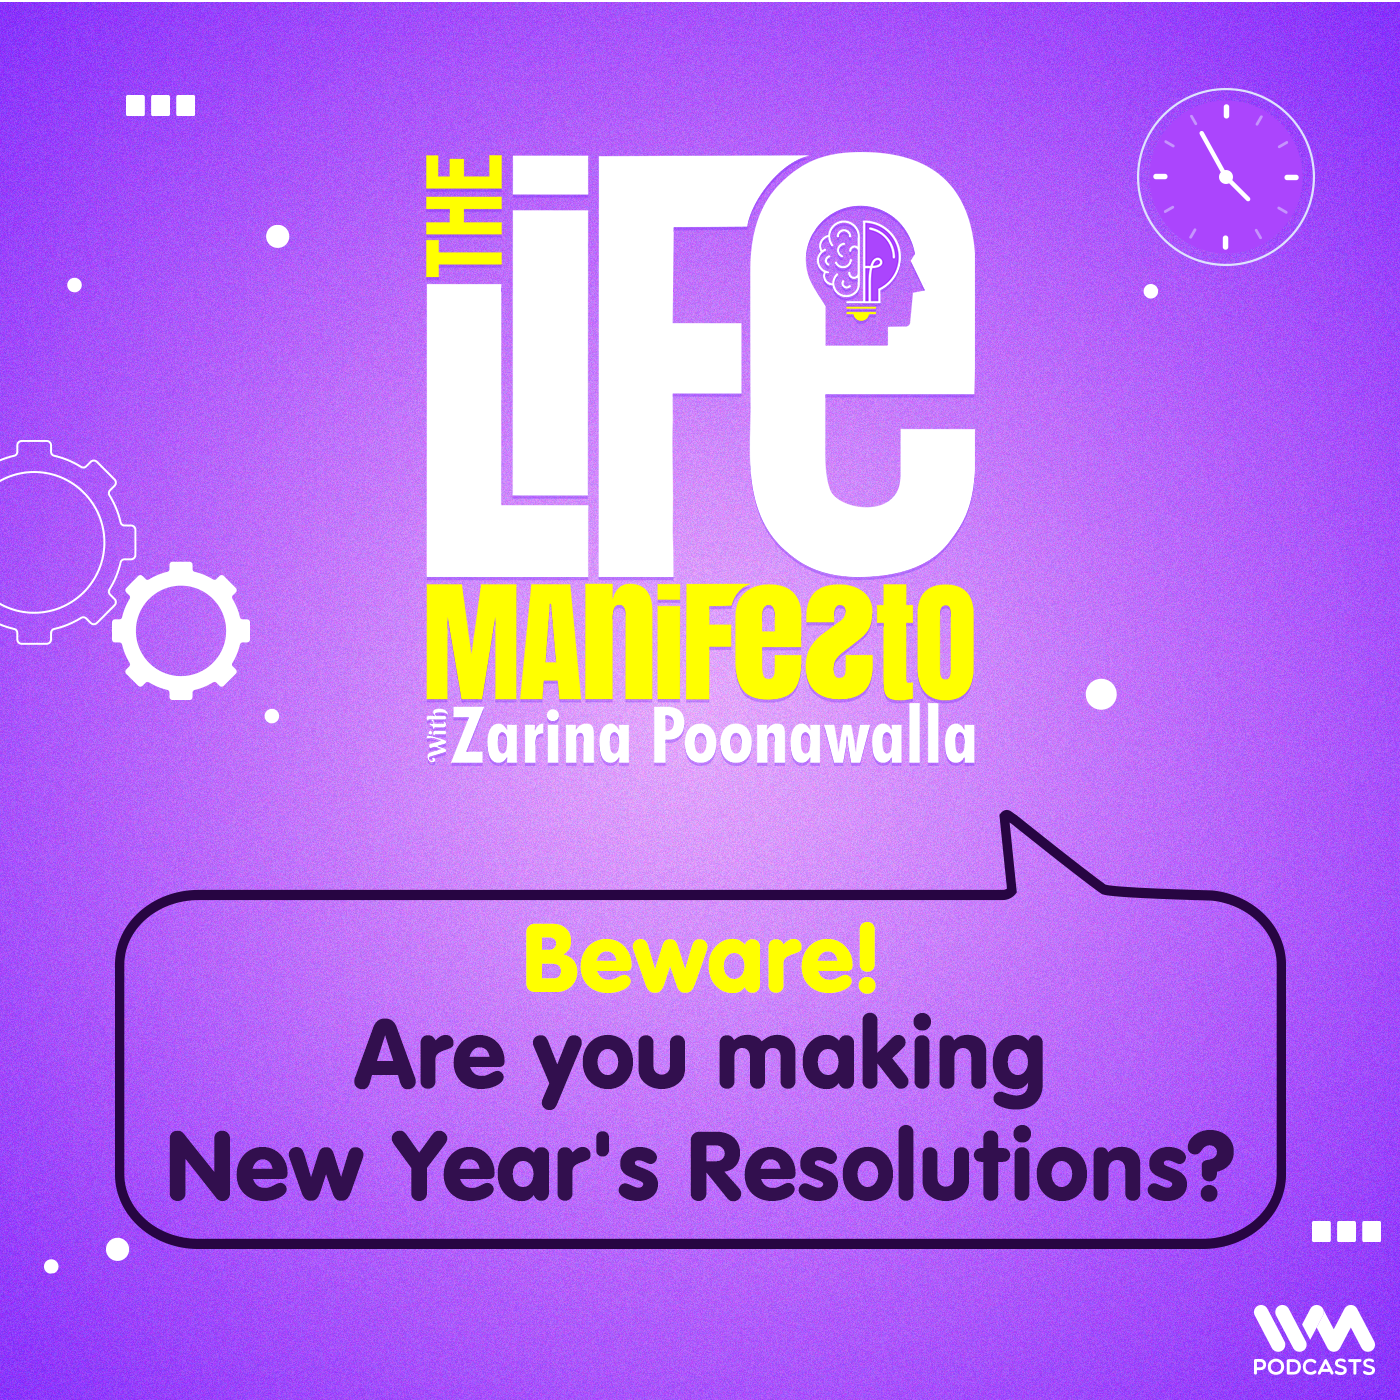 Beware! Are you making New Year's Resolutions?